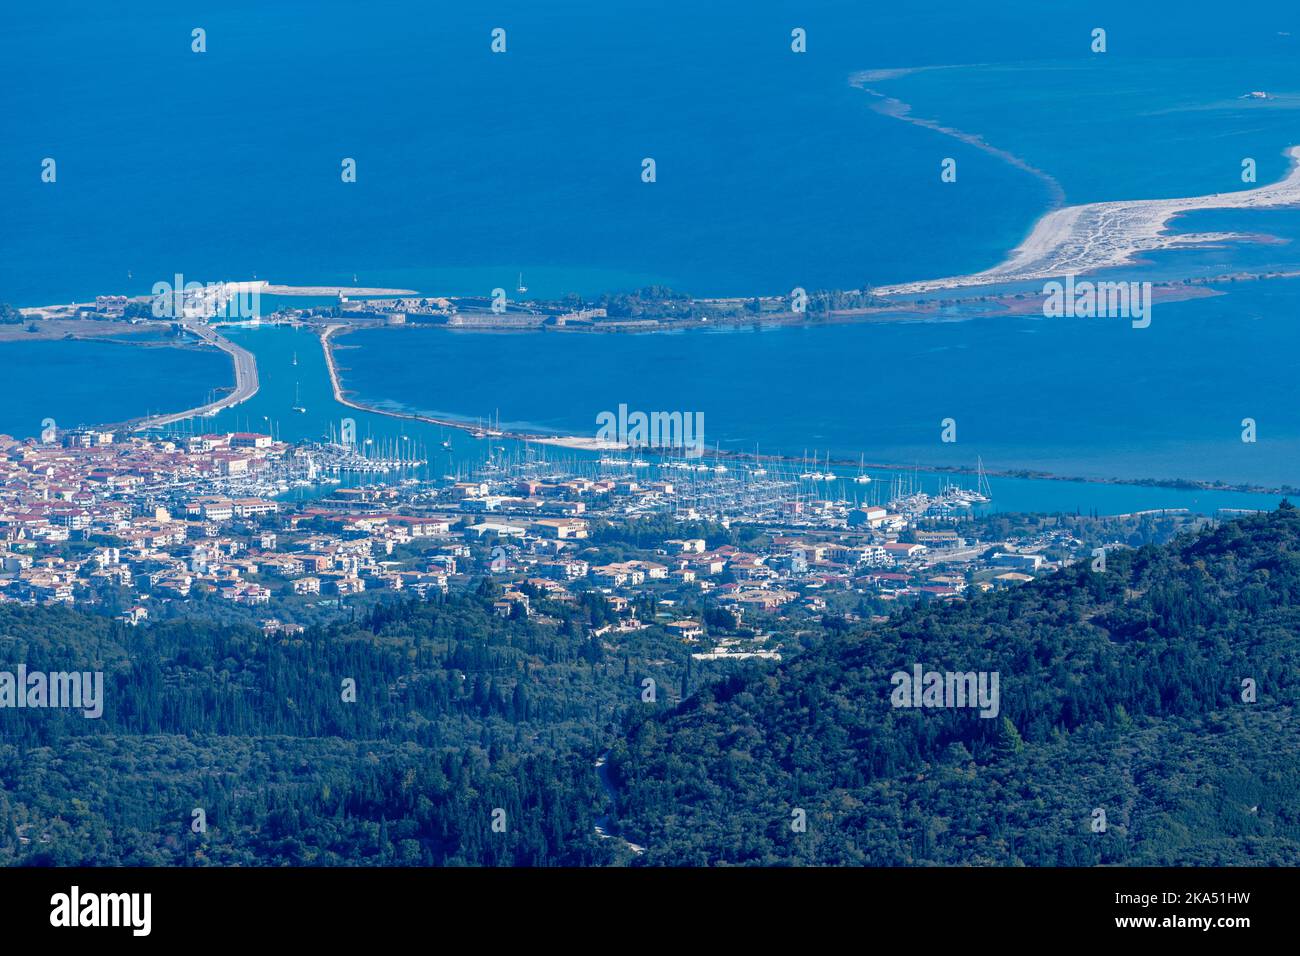 A mountain top view of Lefkada island, Greece, showing the capital and the causeway link to the mainland. Stock Photo